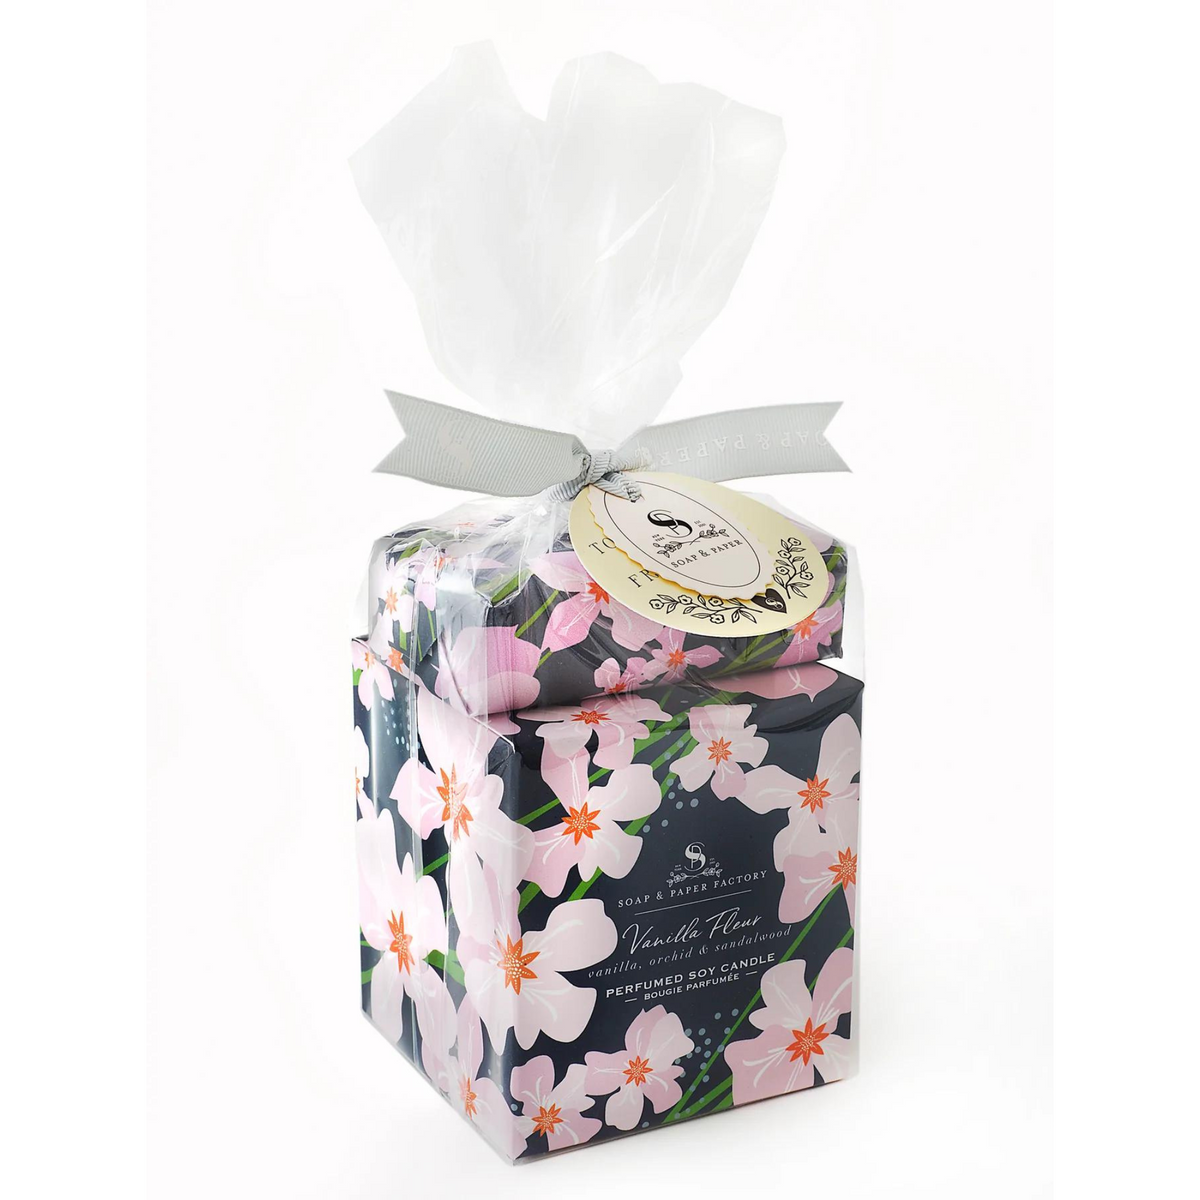 Primary Image of Soap & Paper Factory Vanilla Fleur Large Soy Candle & Soap Gift Set